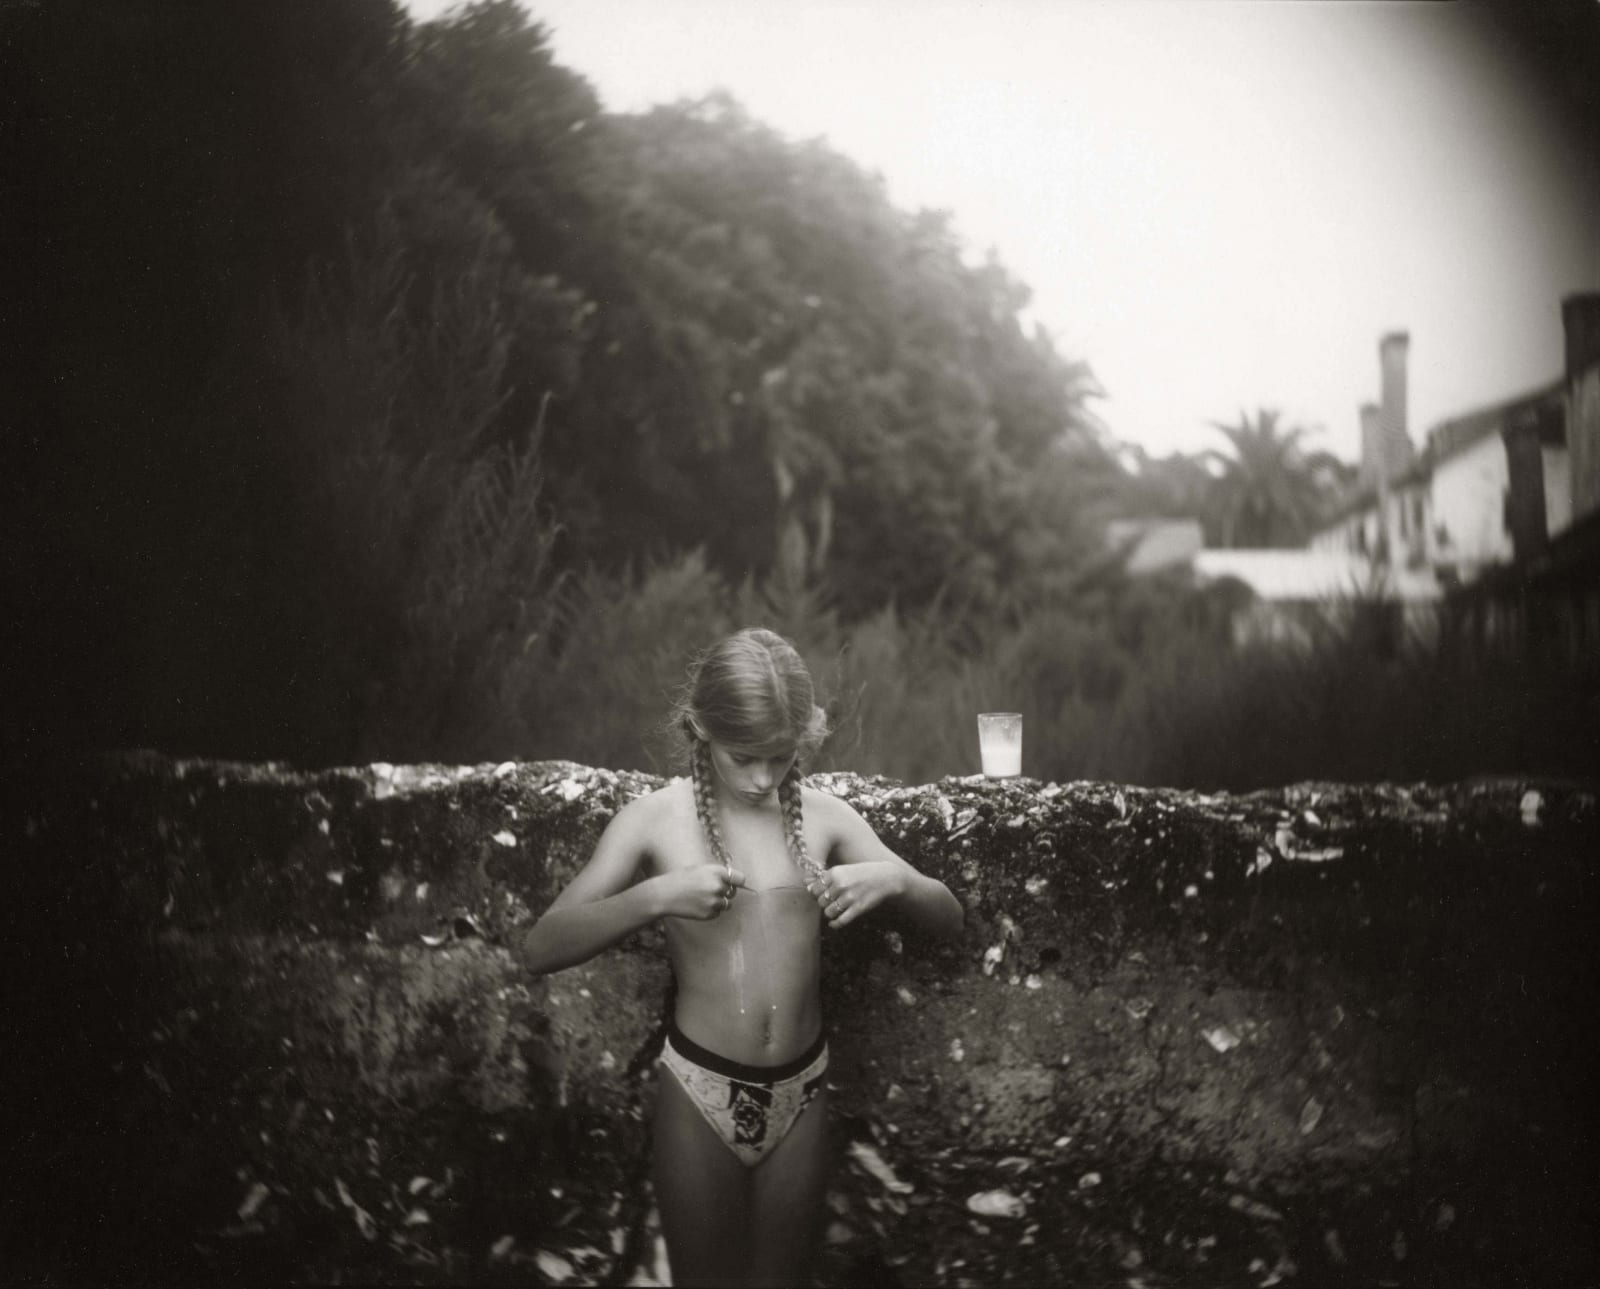 Jessie with glass of milk, from the Immediate Family series, by Sally Mann